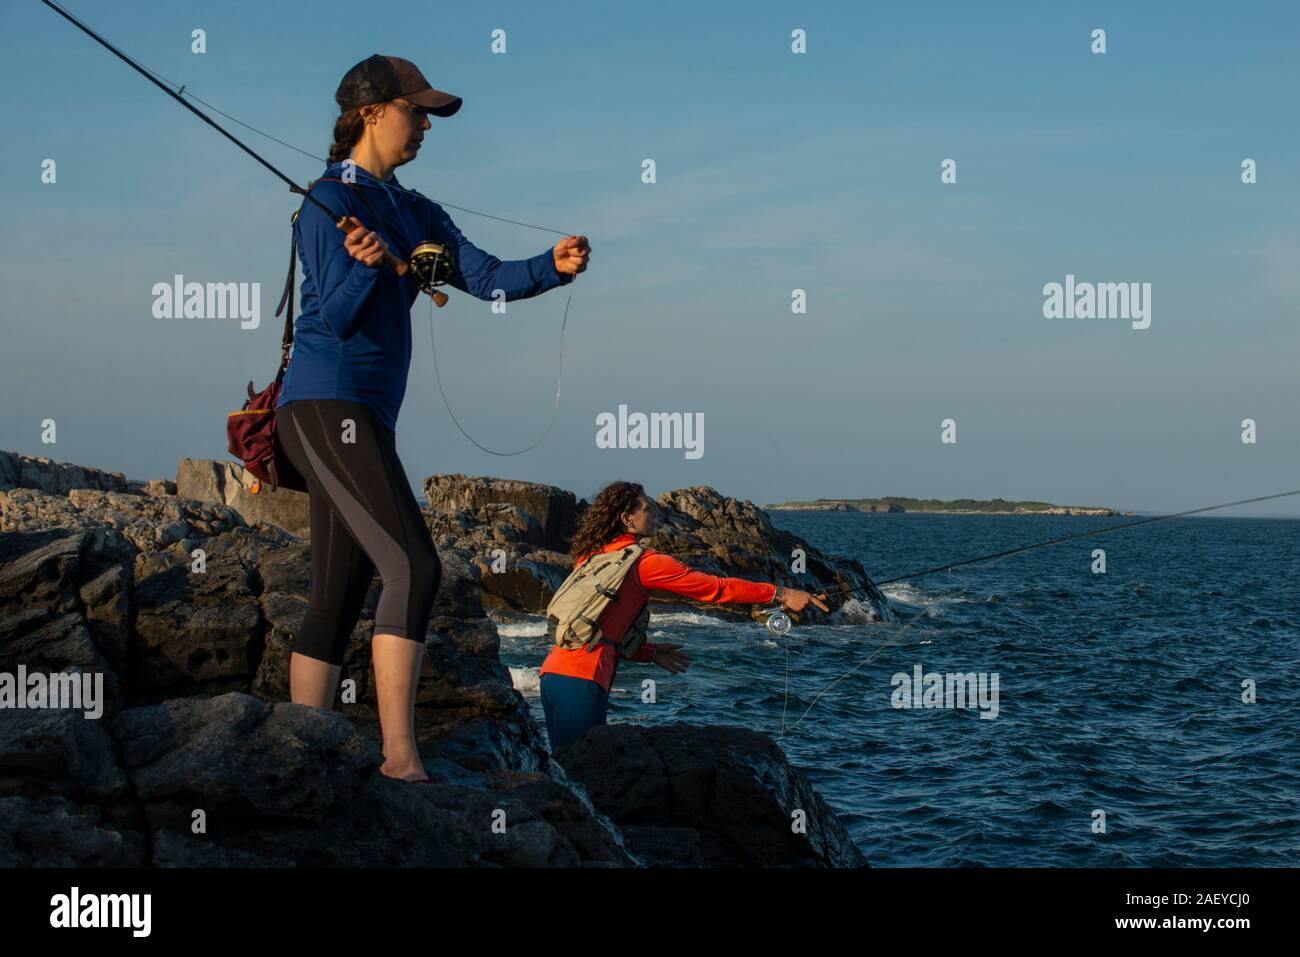 https://c8.alamy.com/comp/2AEYCJ0/two-young-women-fly-fishing-for-striped-bass-on-a-summer-afternoon-in-maine-2AEYCJ0.jpg